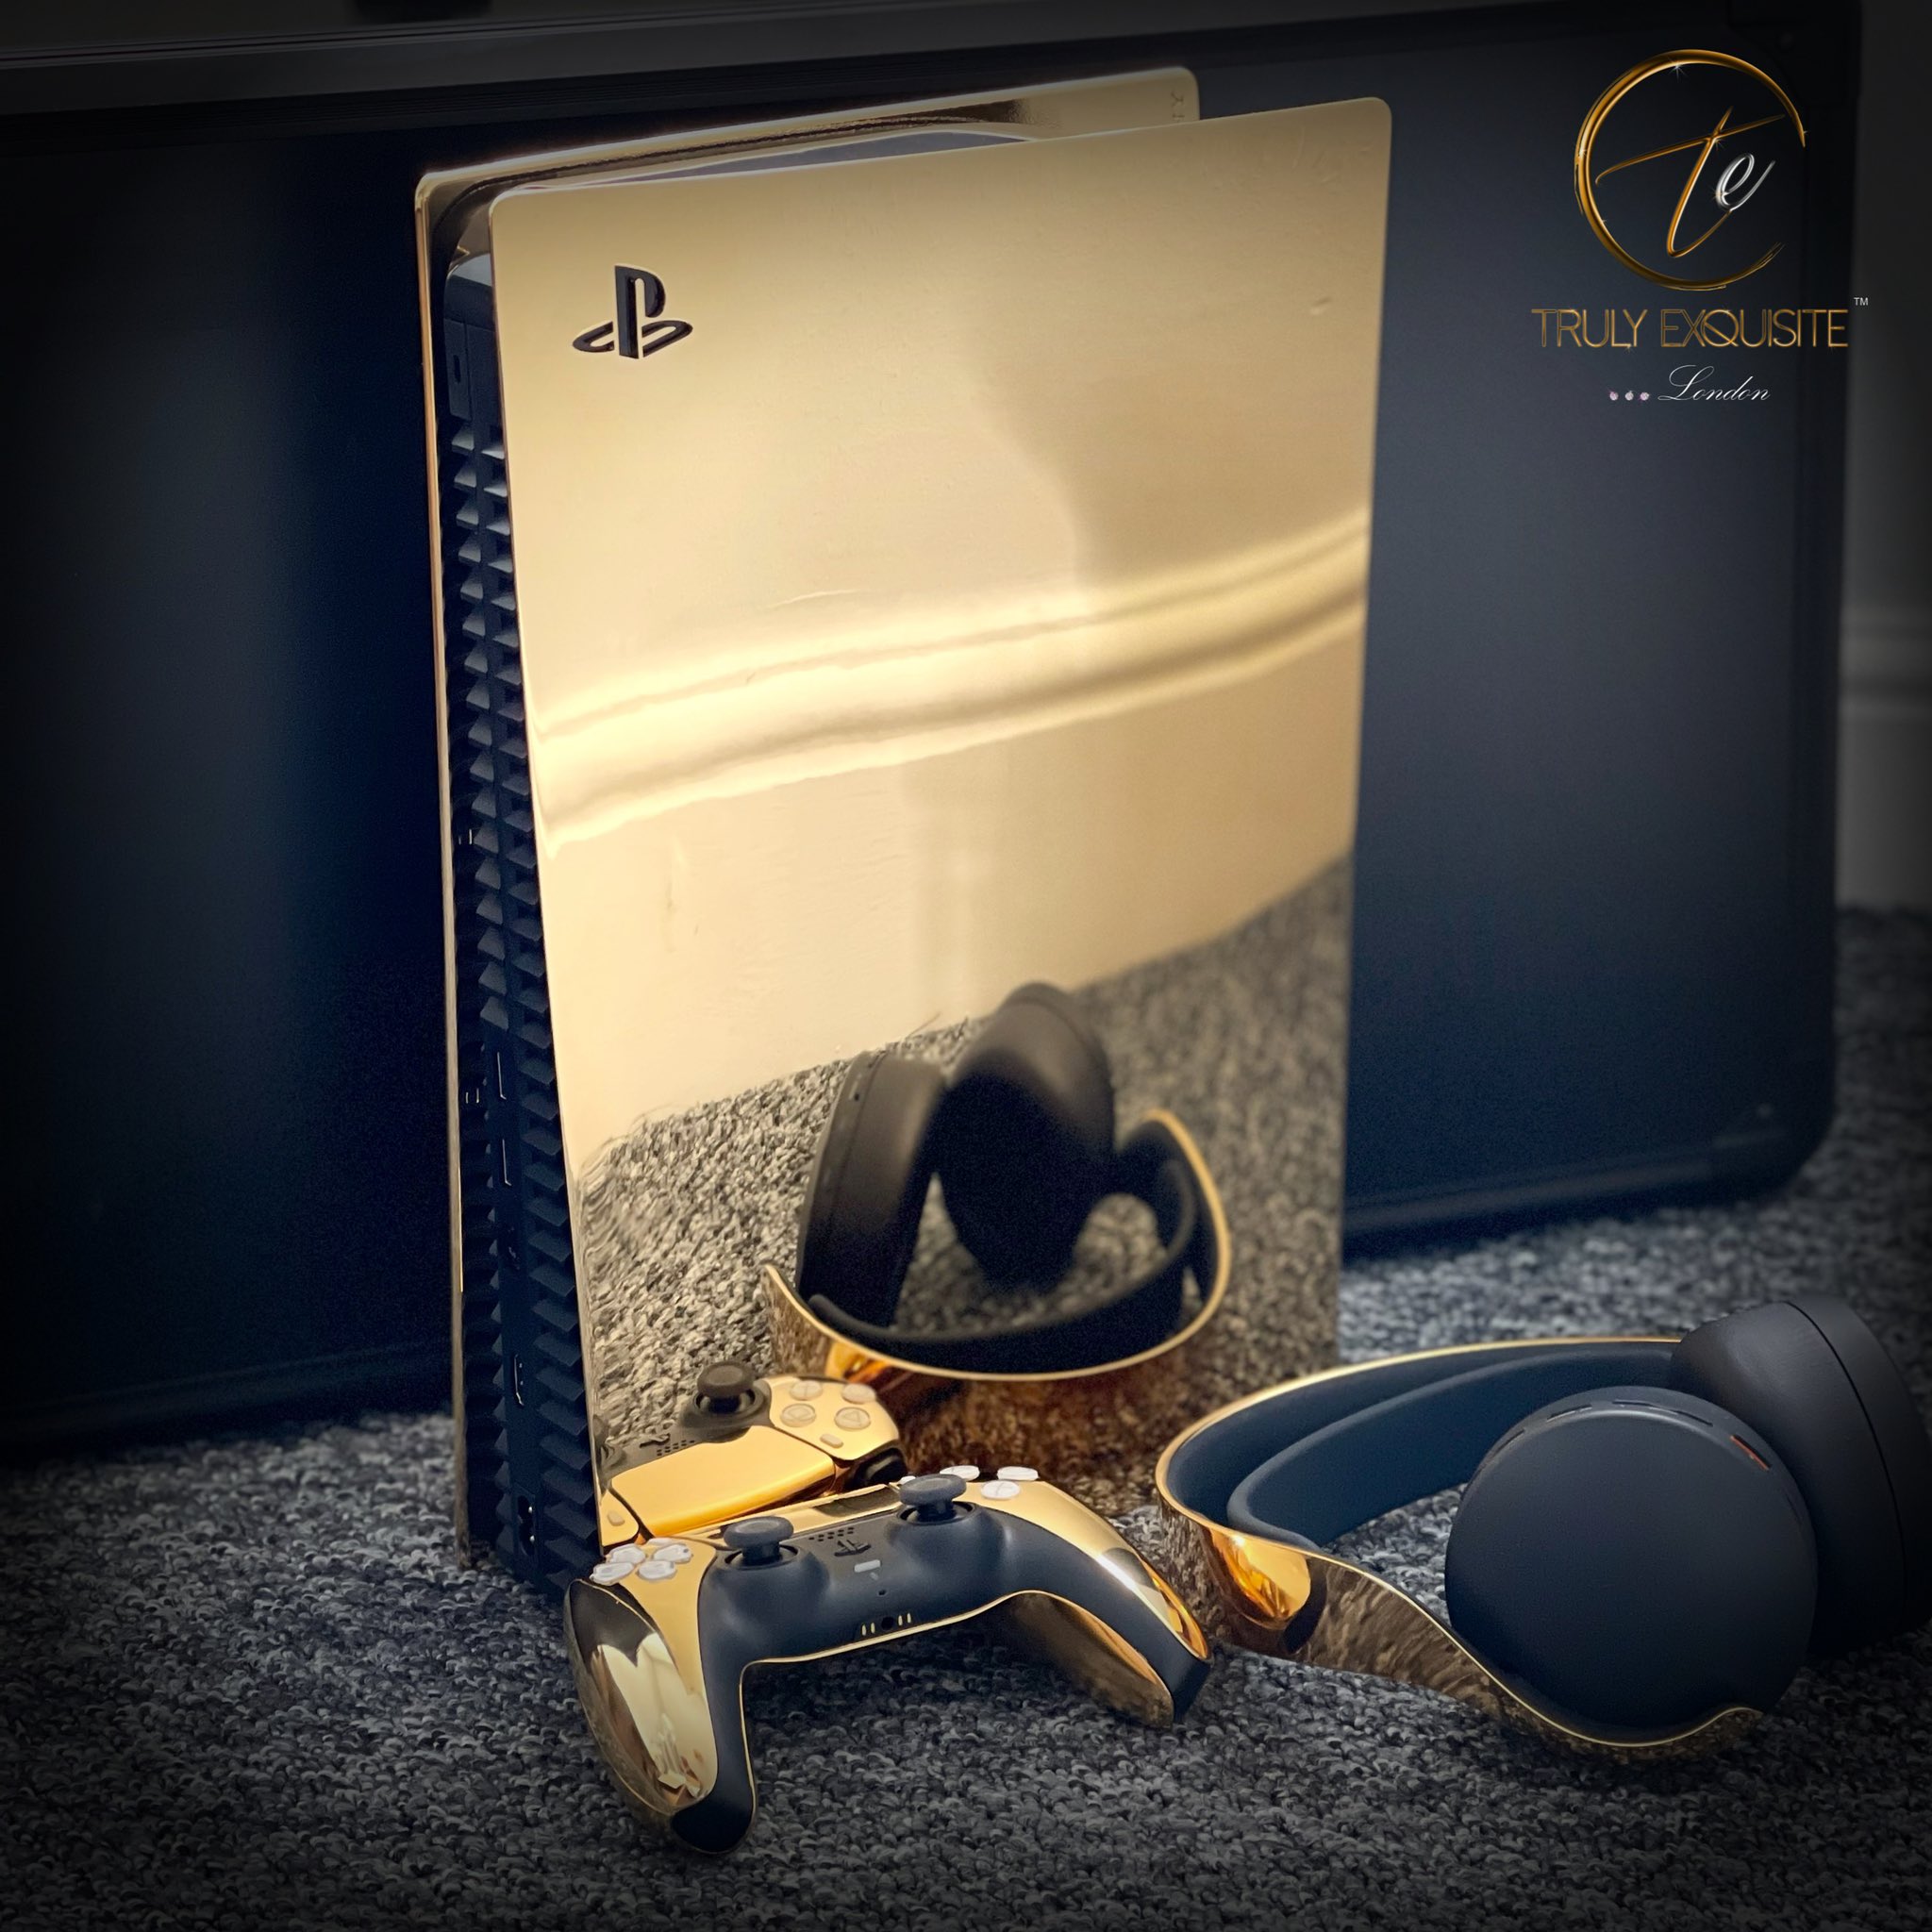 Limited edition 24K gold-plated PS5 to launch post the actual